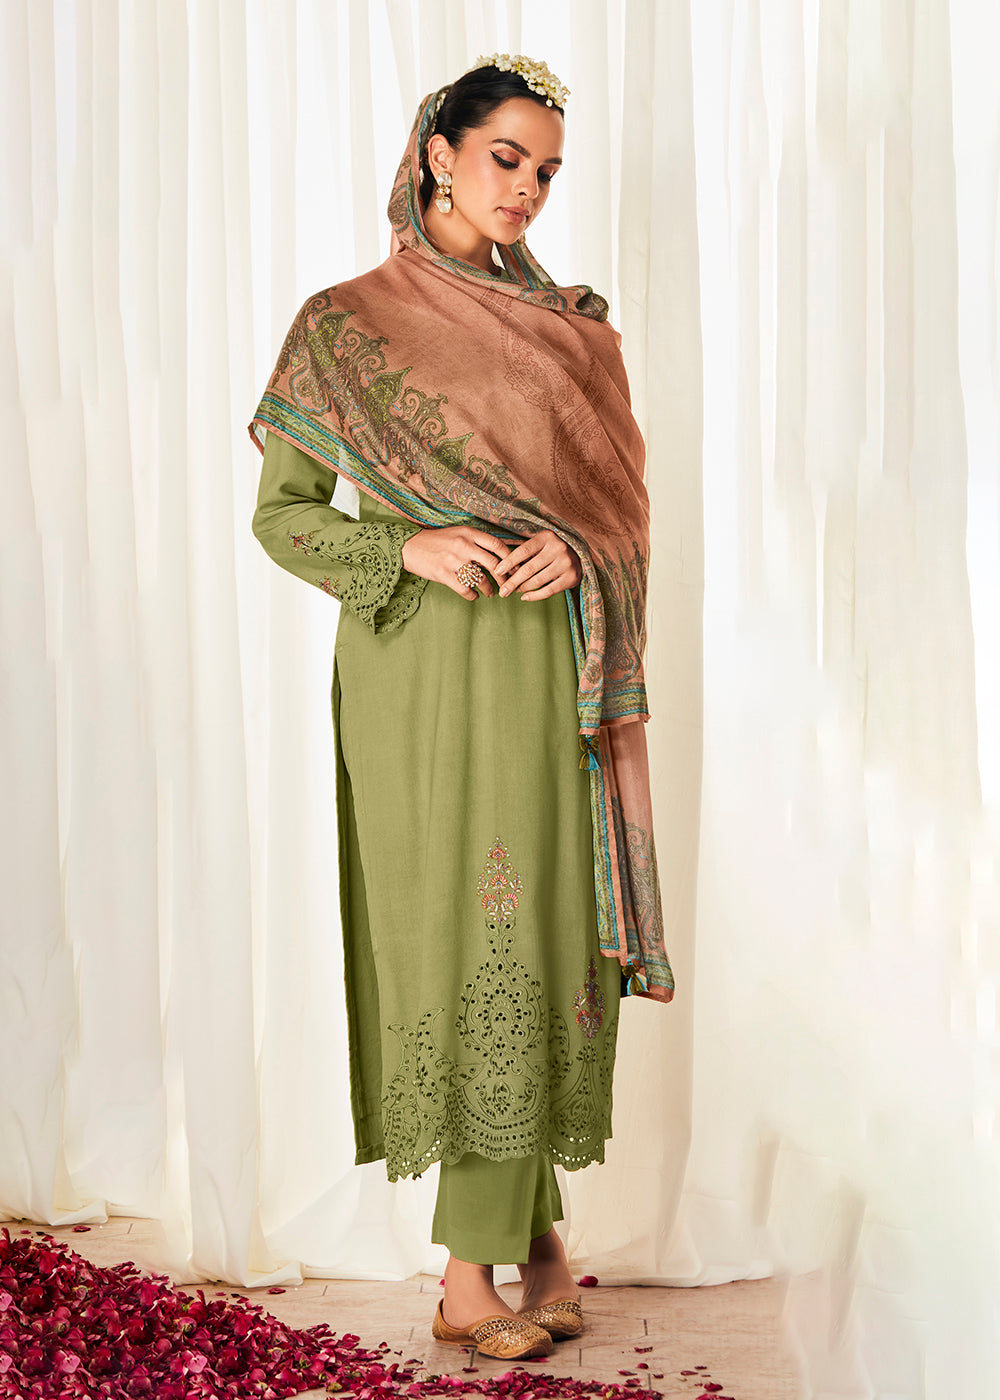 Buy Now Pleasing Green Suzani Inspired Embroidered Ethnic Salwar Suit Online in USA, UK, Canada, Germany, Australia & Worldwide at Empress Clothing.